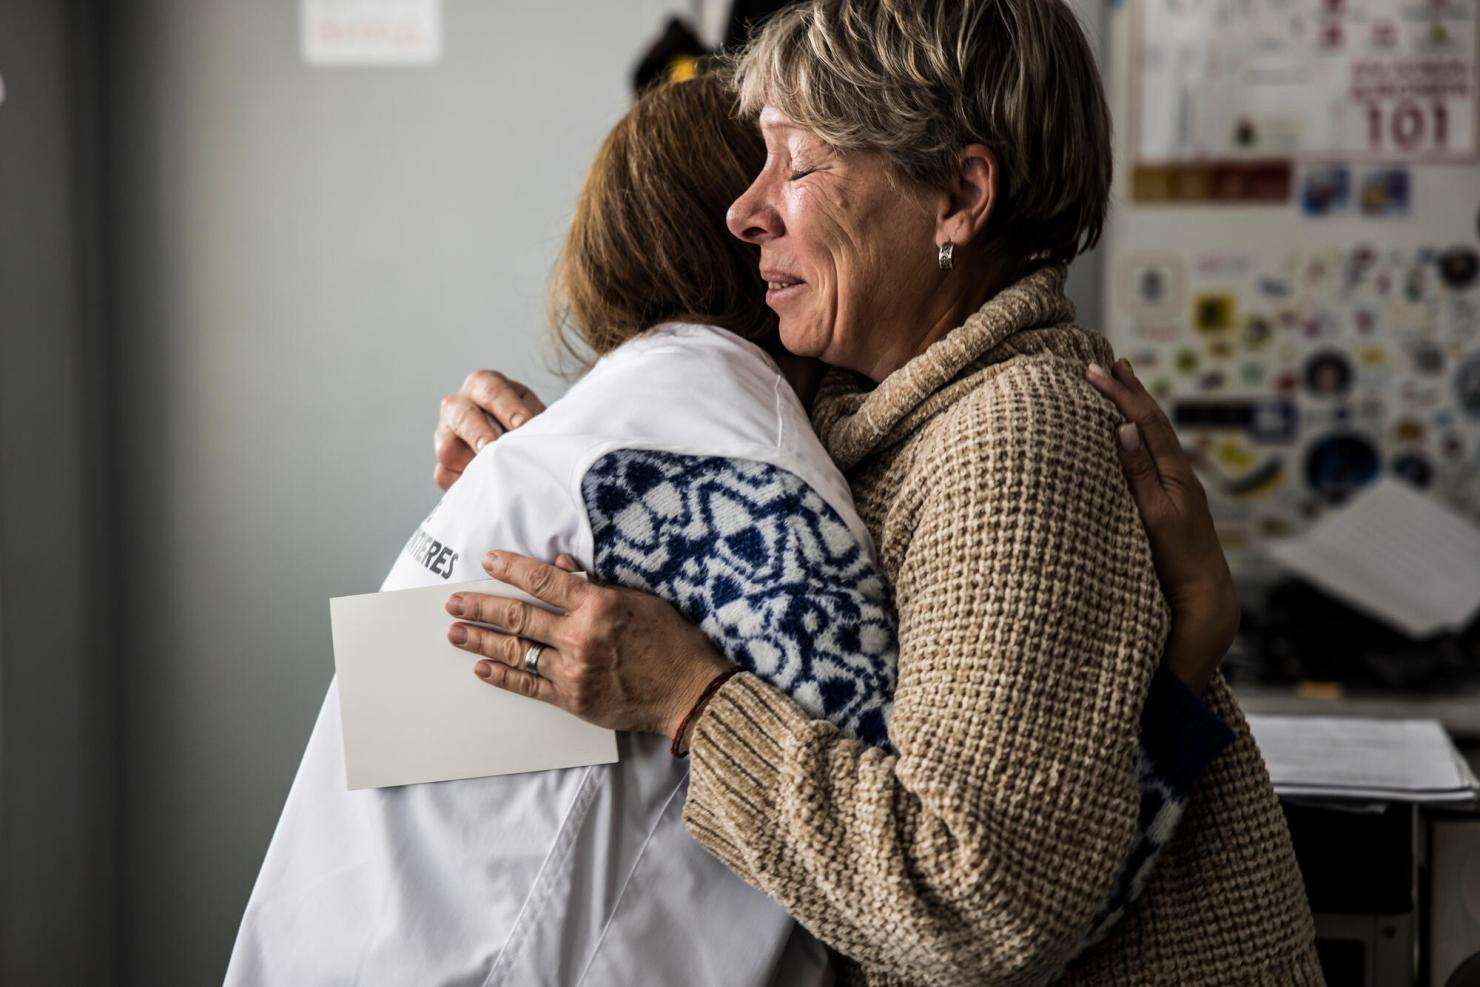 Providing Emotional Support to Health Workers on the Frontlines in Ukraine | Doctors Without Borders